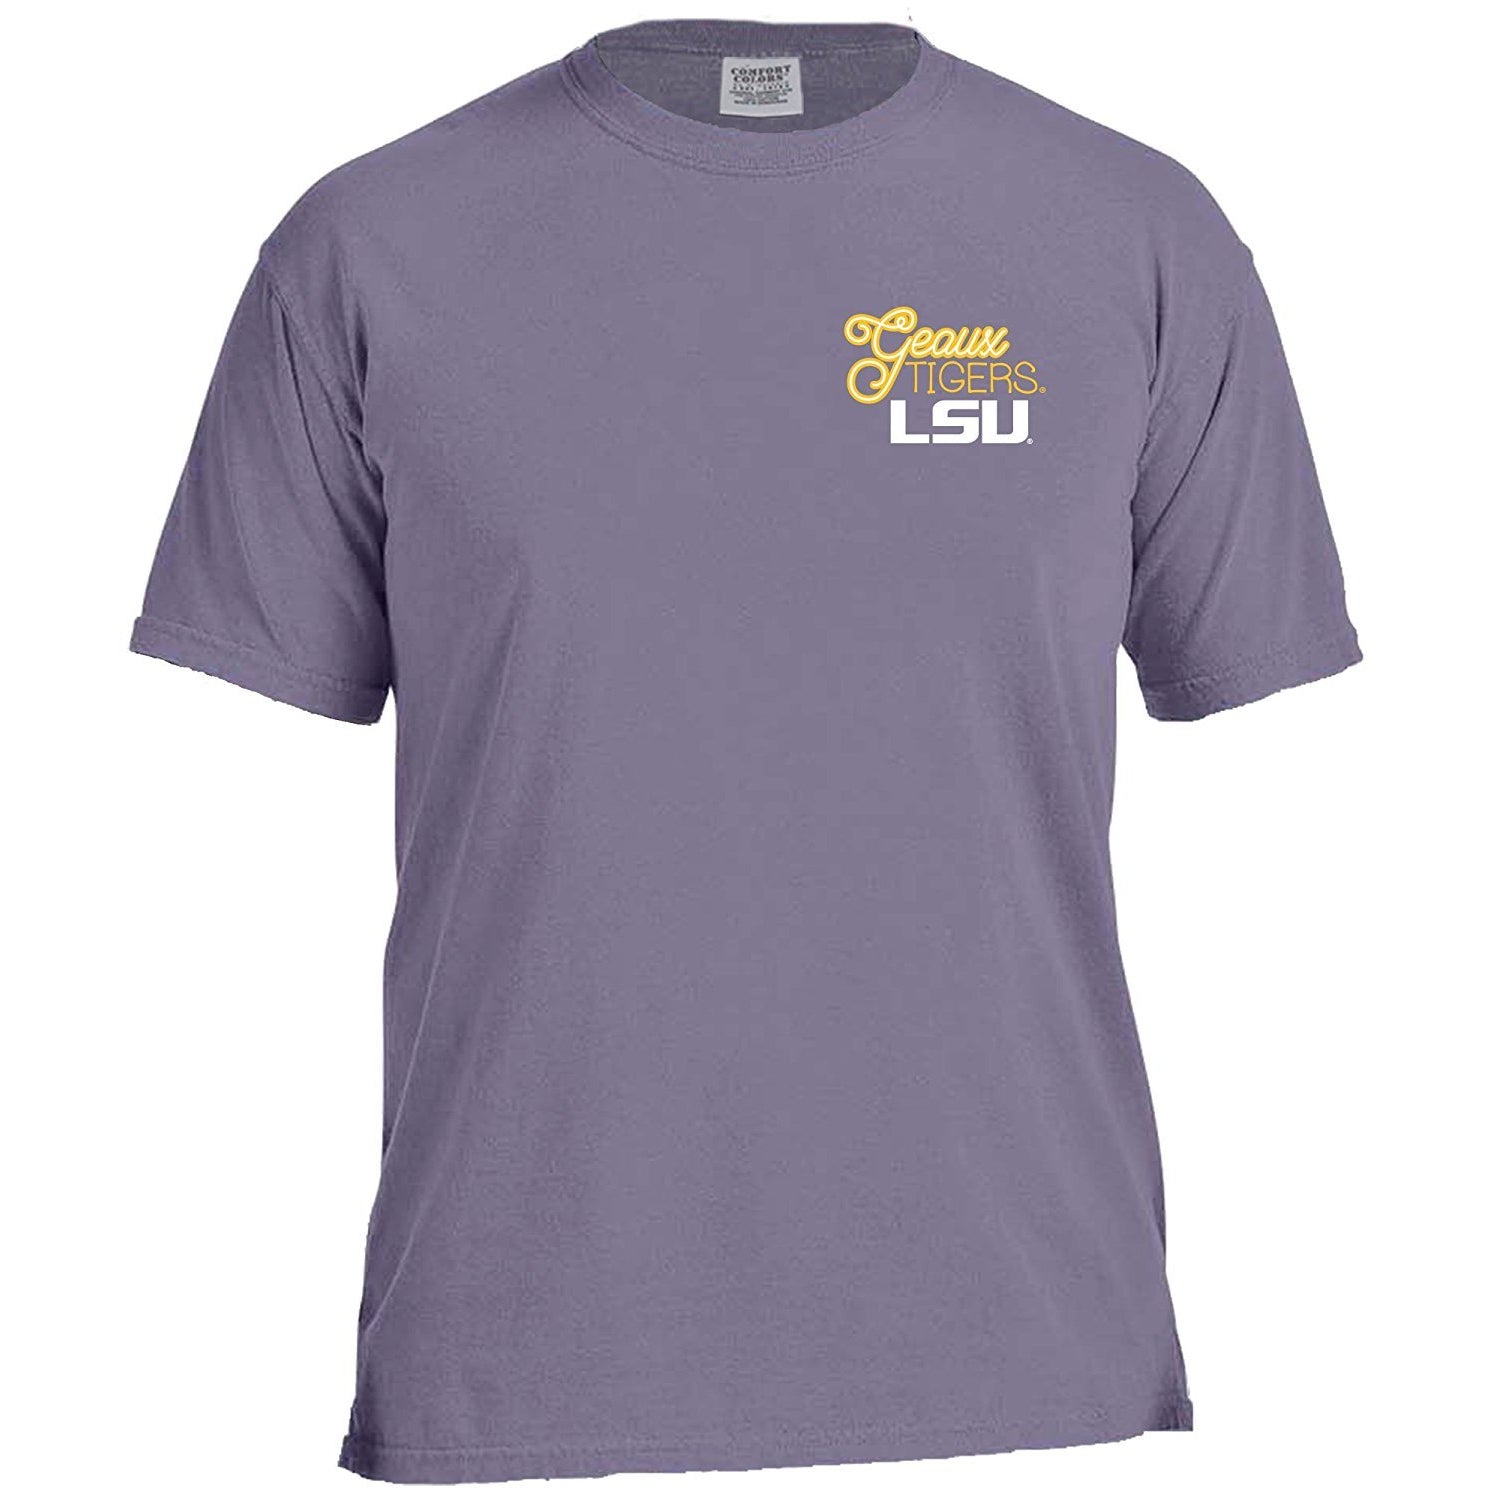 Laces and Bows Collegiate T-Shirt - LSU - Southern Ivy Boutique